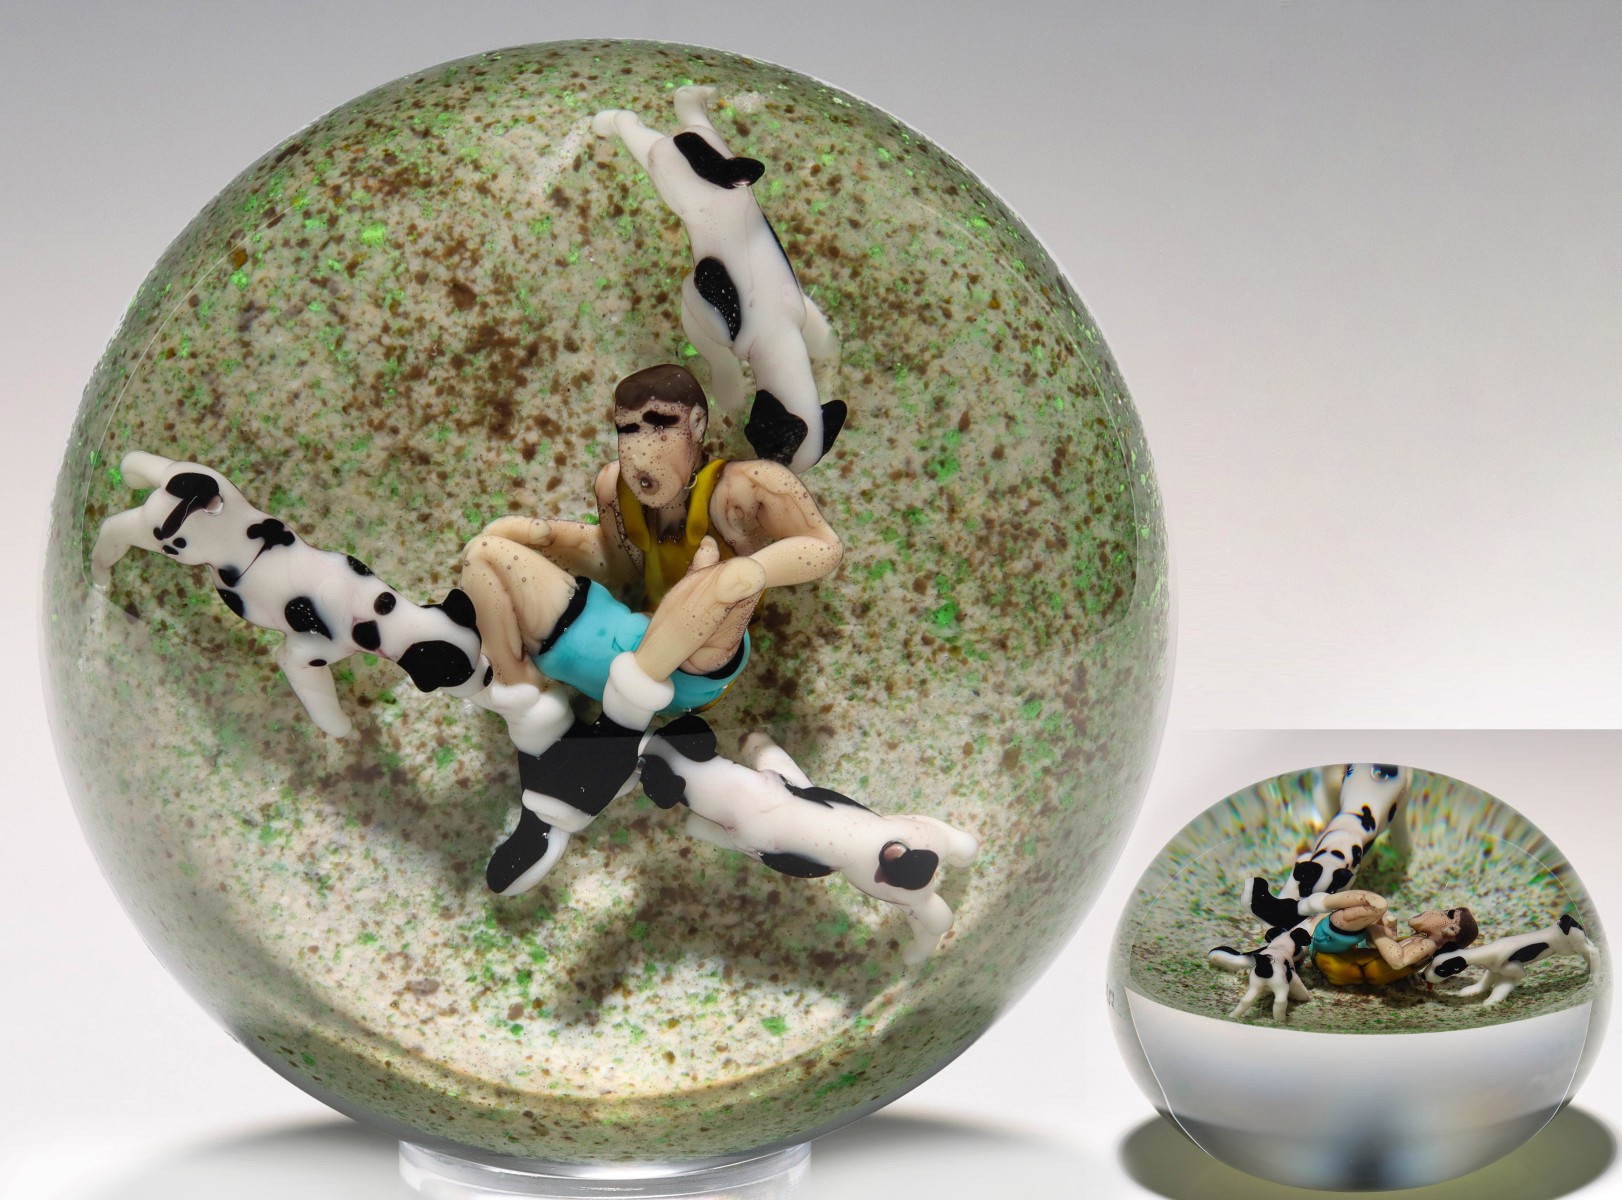 A JIM D'ONOFRIO WHIMSICAL LAMPWORK PAPERWEIGHT